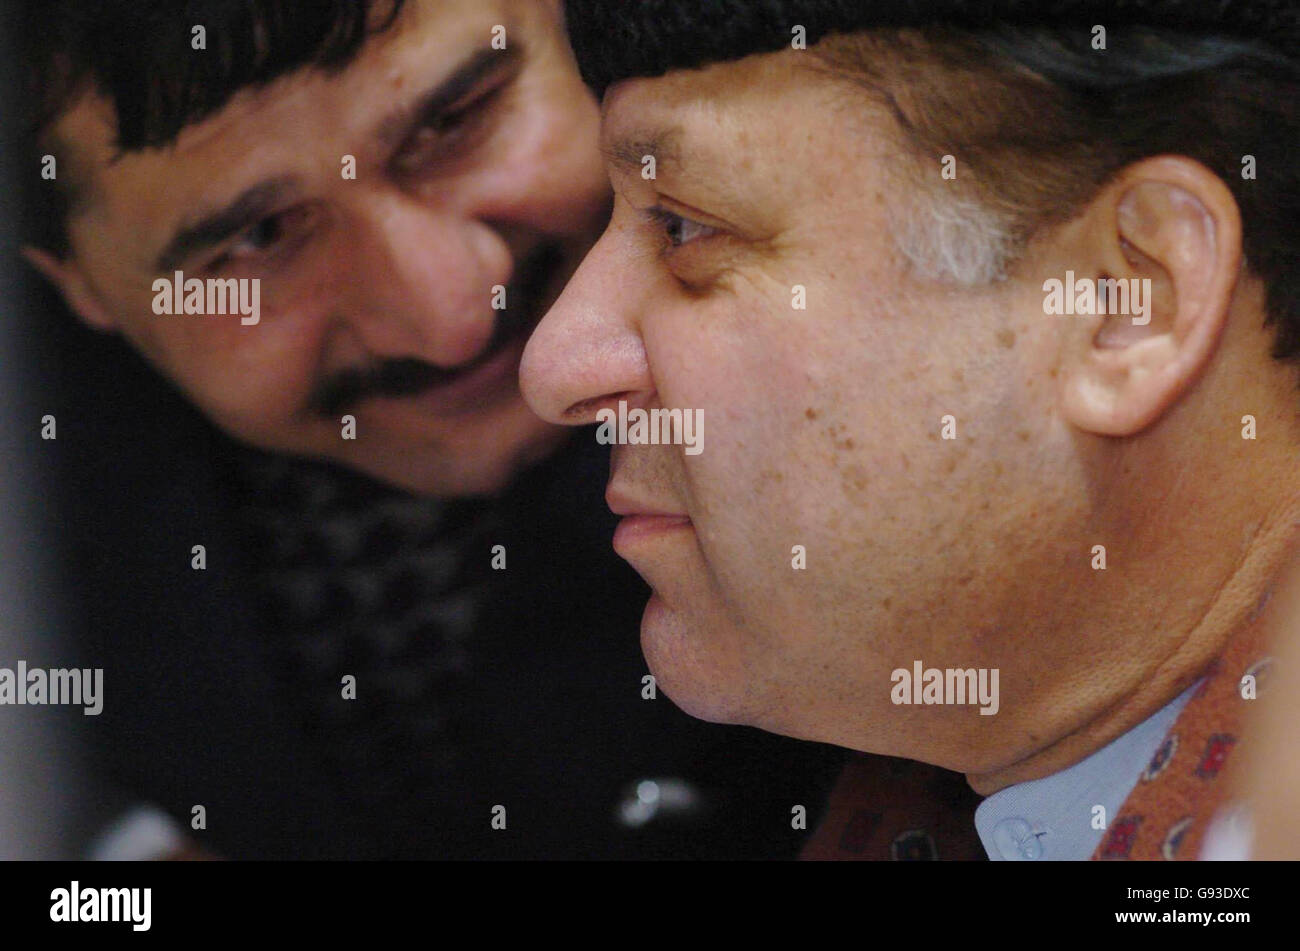 An unidentified man stands near former Prime Minister of Pakistan Nawaz Sharif (front) inside Baylis House in Slough, Berkshire, Sunday January 29, 2006. Mr Sharif flew into Britain this evening from Saudi Arabia where he has been in exile for the past five years. Mr Sharif was ousted from power during a military coup in Pakistan in October 1999. Watch for PA story POLITICS Sharif. PRESS ASSOCIATION photo. Photo credit should read: Johnny Green/PA. Stock Photo